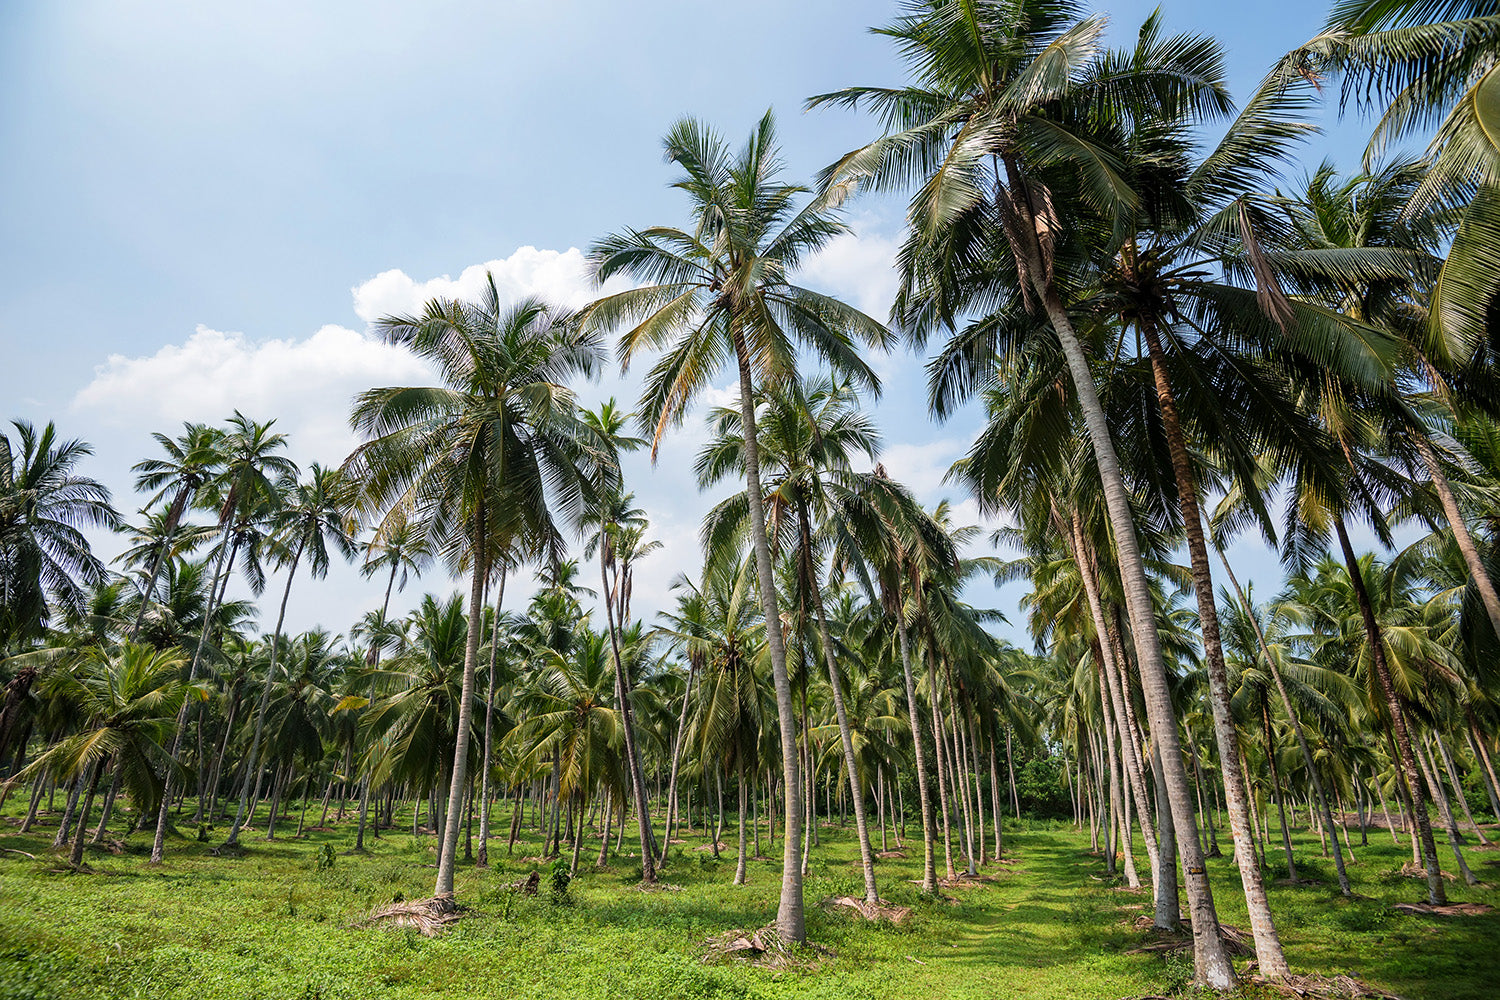 Weed management 101: Essential practices for maintaining a healthy coconut farm